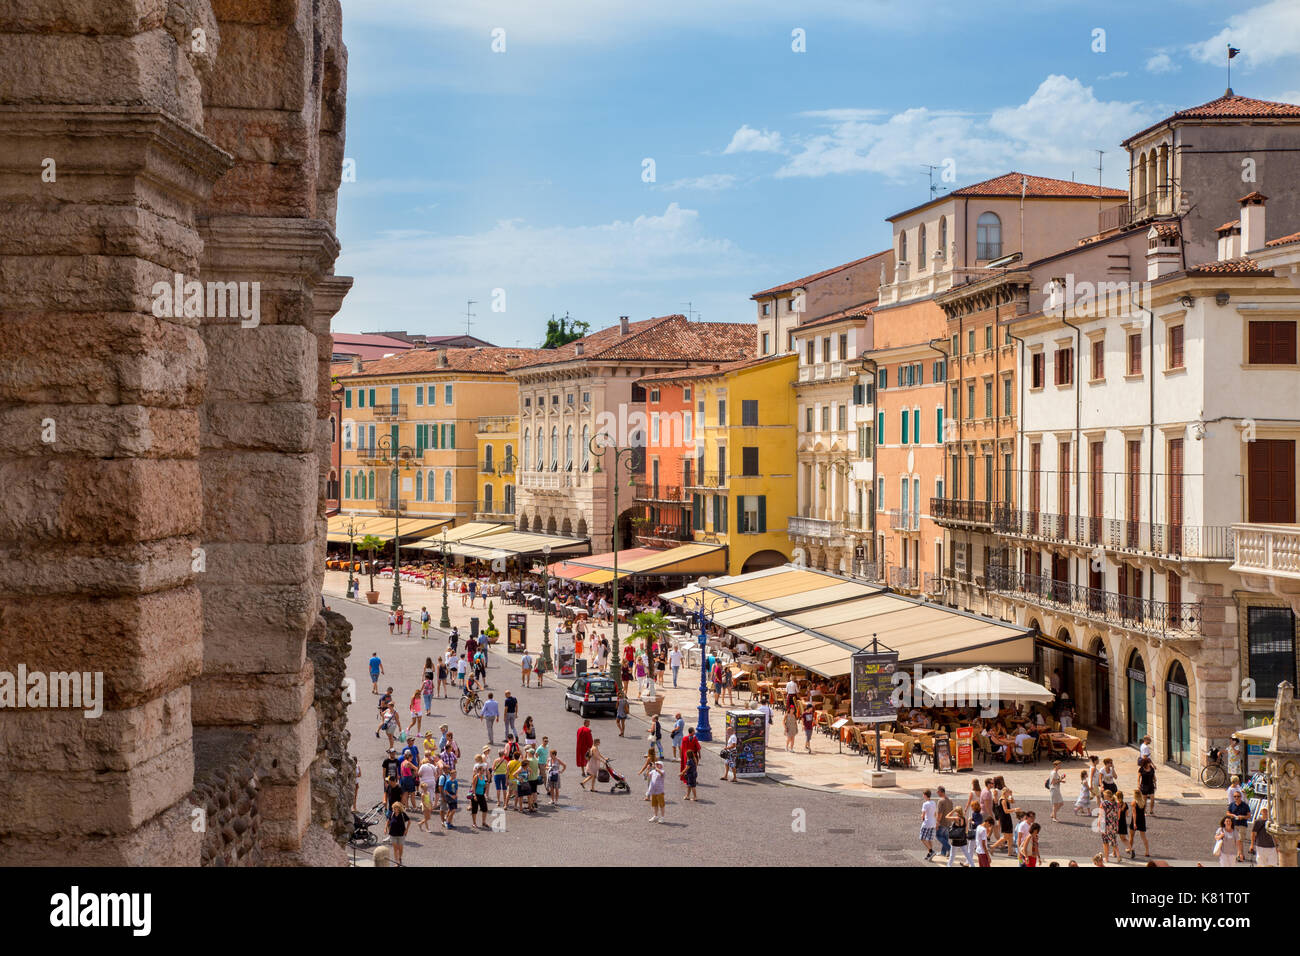 https://c8.alamy.com/comp/K81T0T/view-from-the-roman-arena-aphitheatre-onto-piazza-bra-in-verona-italy-K81T0T.jpg